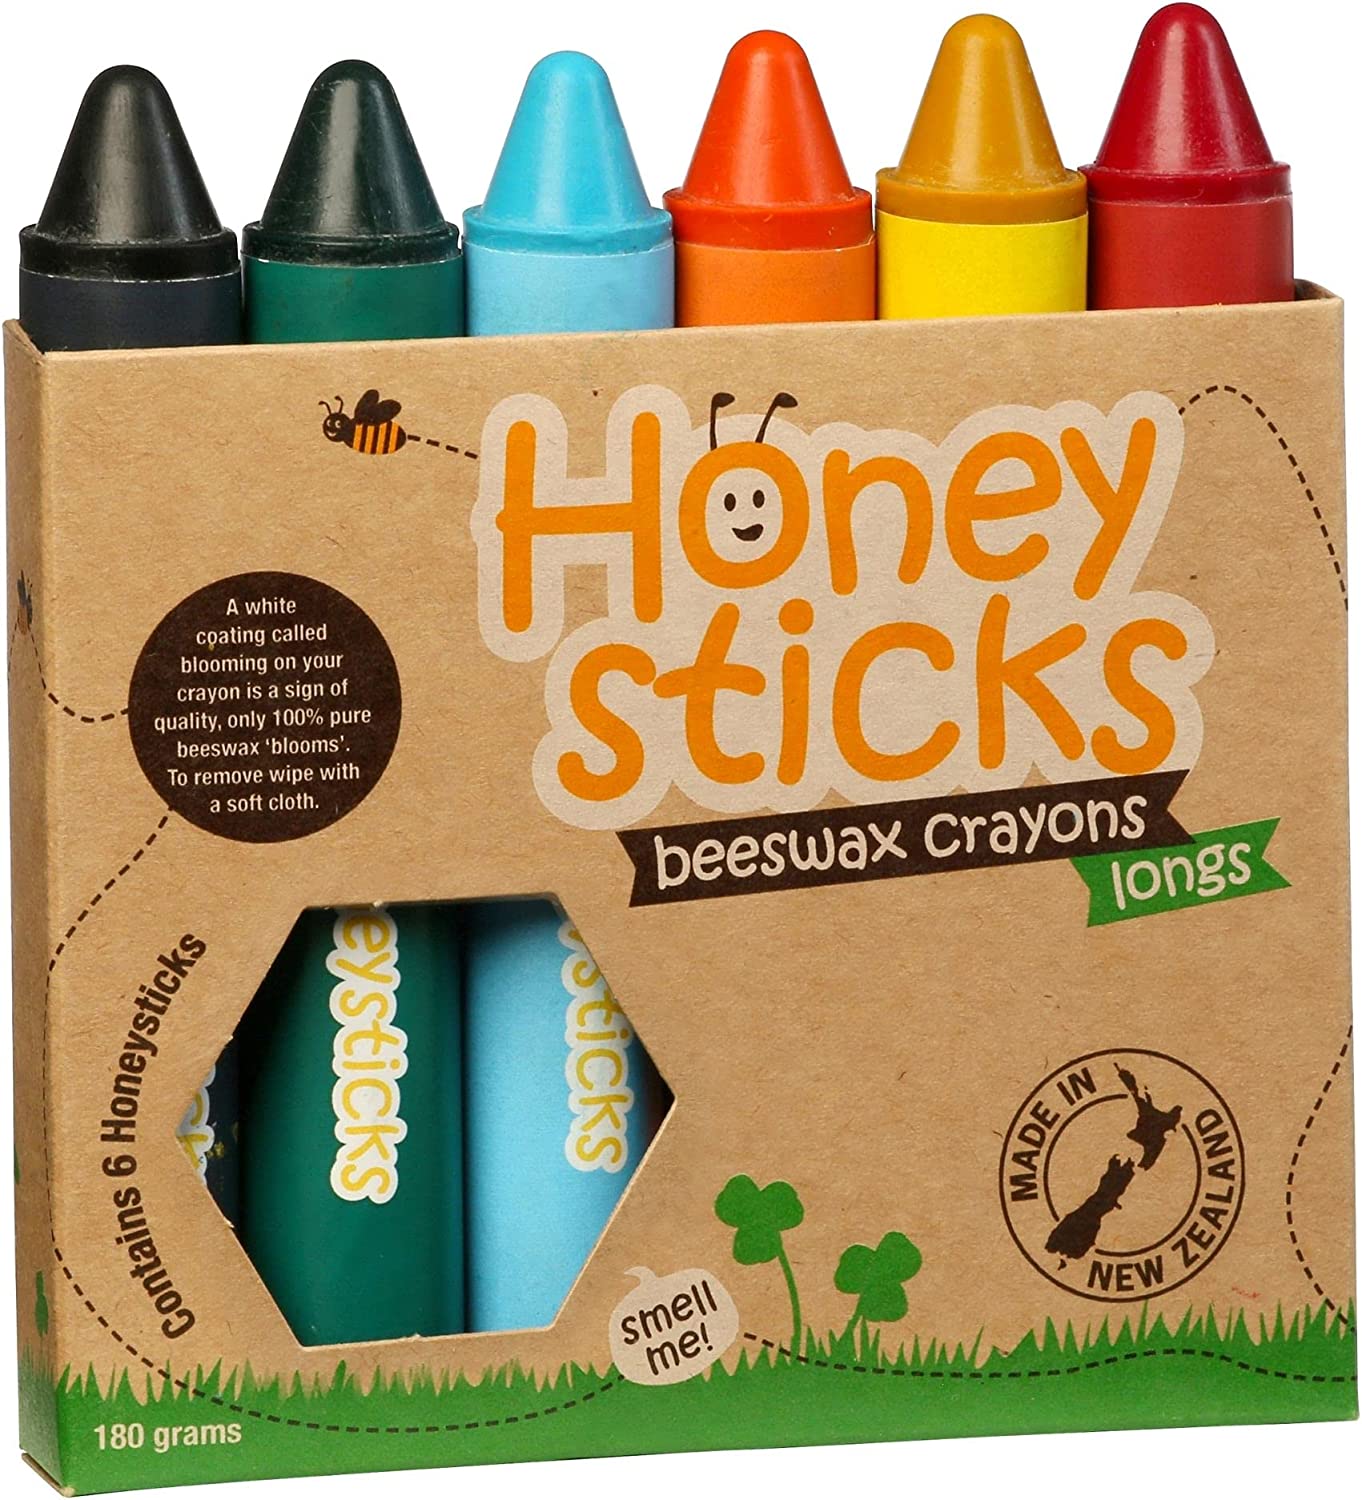 Honeysticks 100% Pure Beeswax Crayons (6 Pack, Longs) Natural, Non Toxic, Safe for Toddlers, Kids and Children, Handmade in New Ze